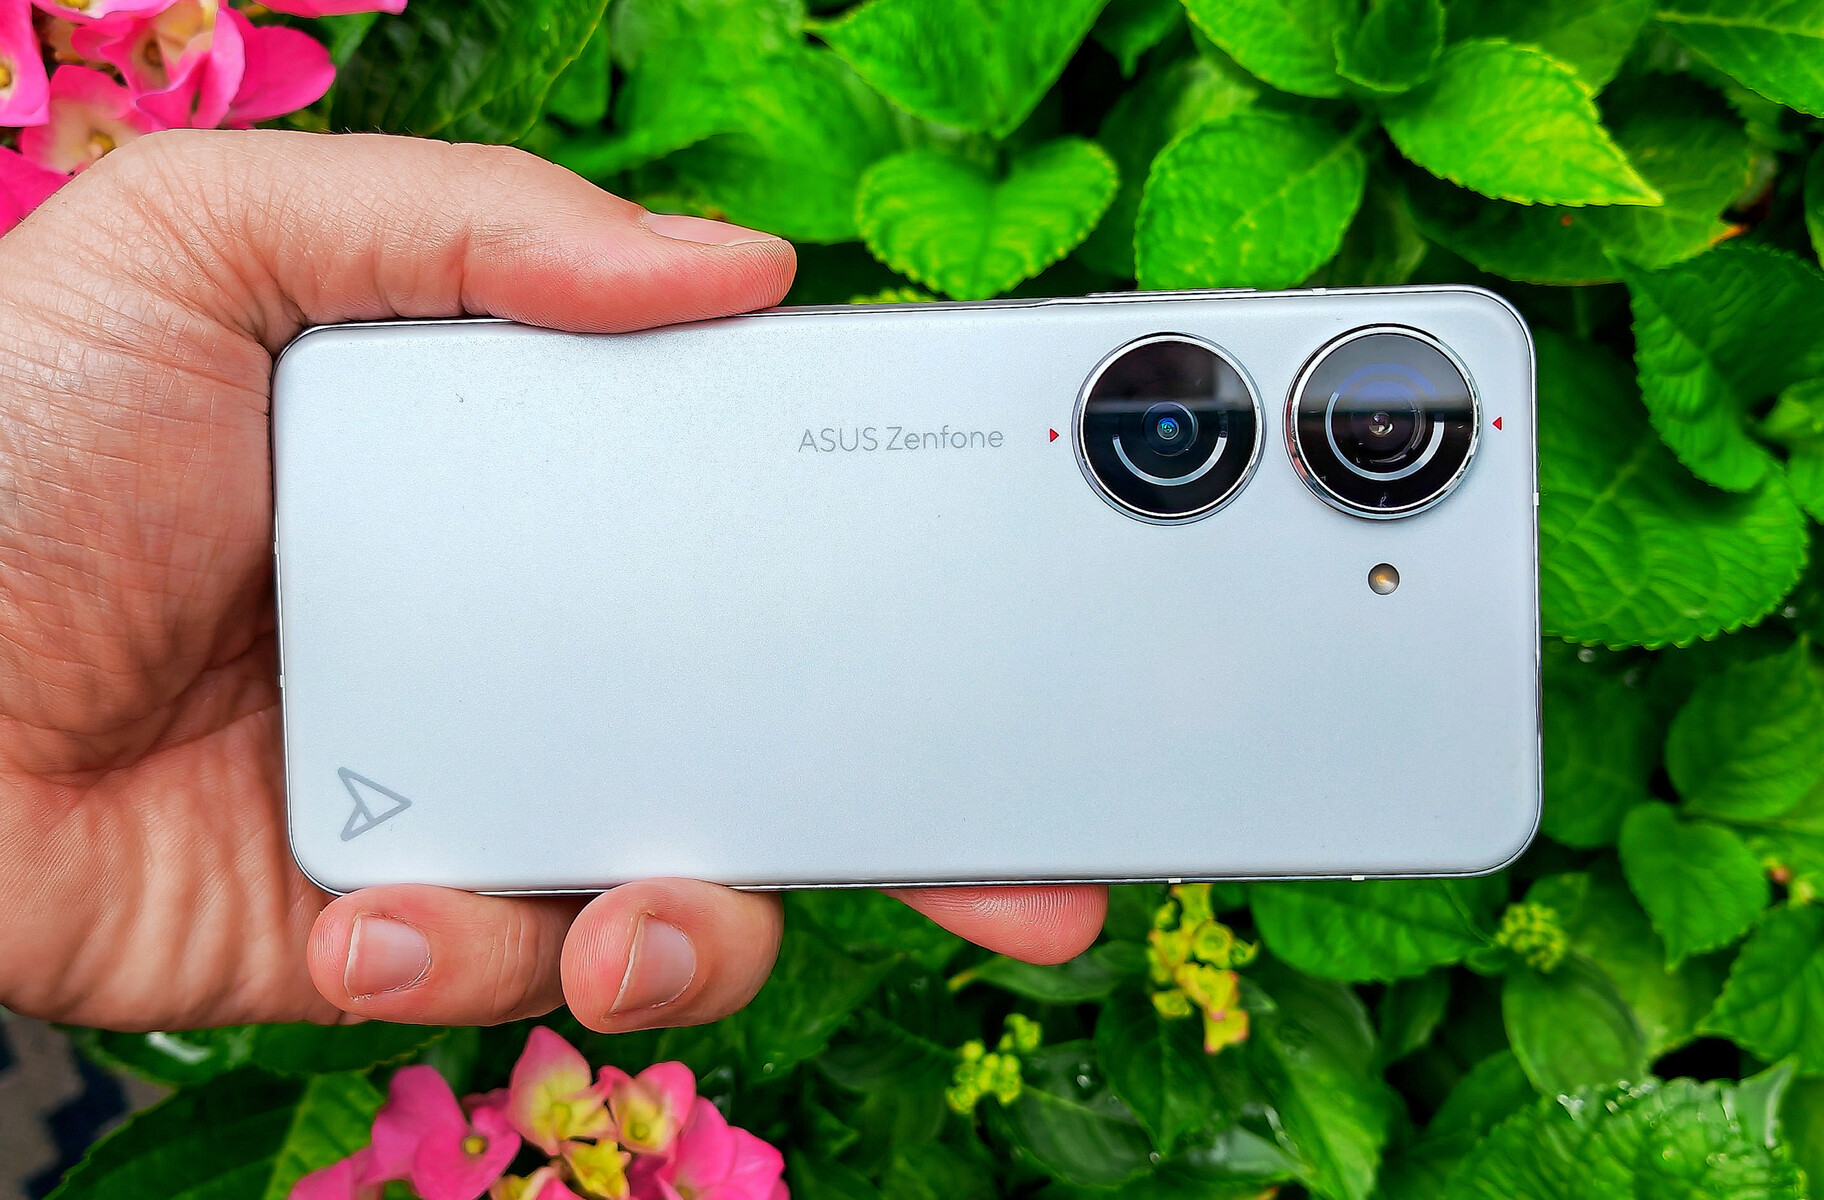 Asus Zenfone 10: Balancing power and portability in a compact device